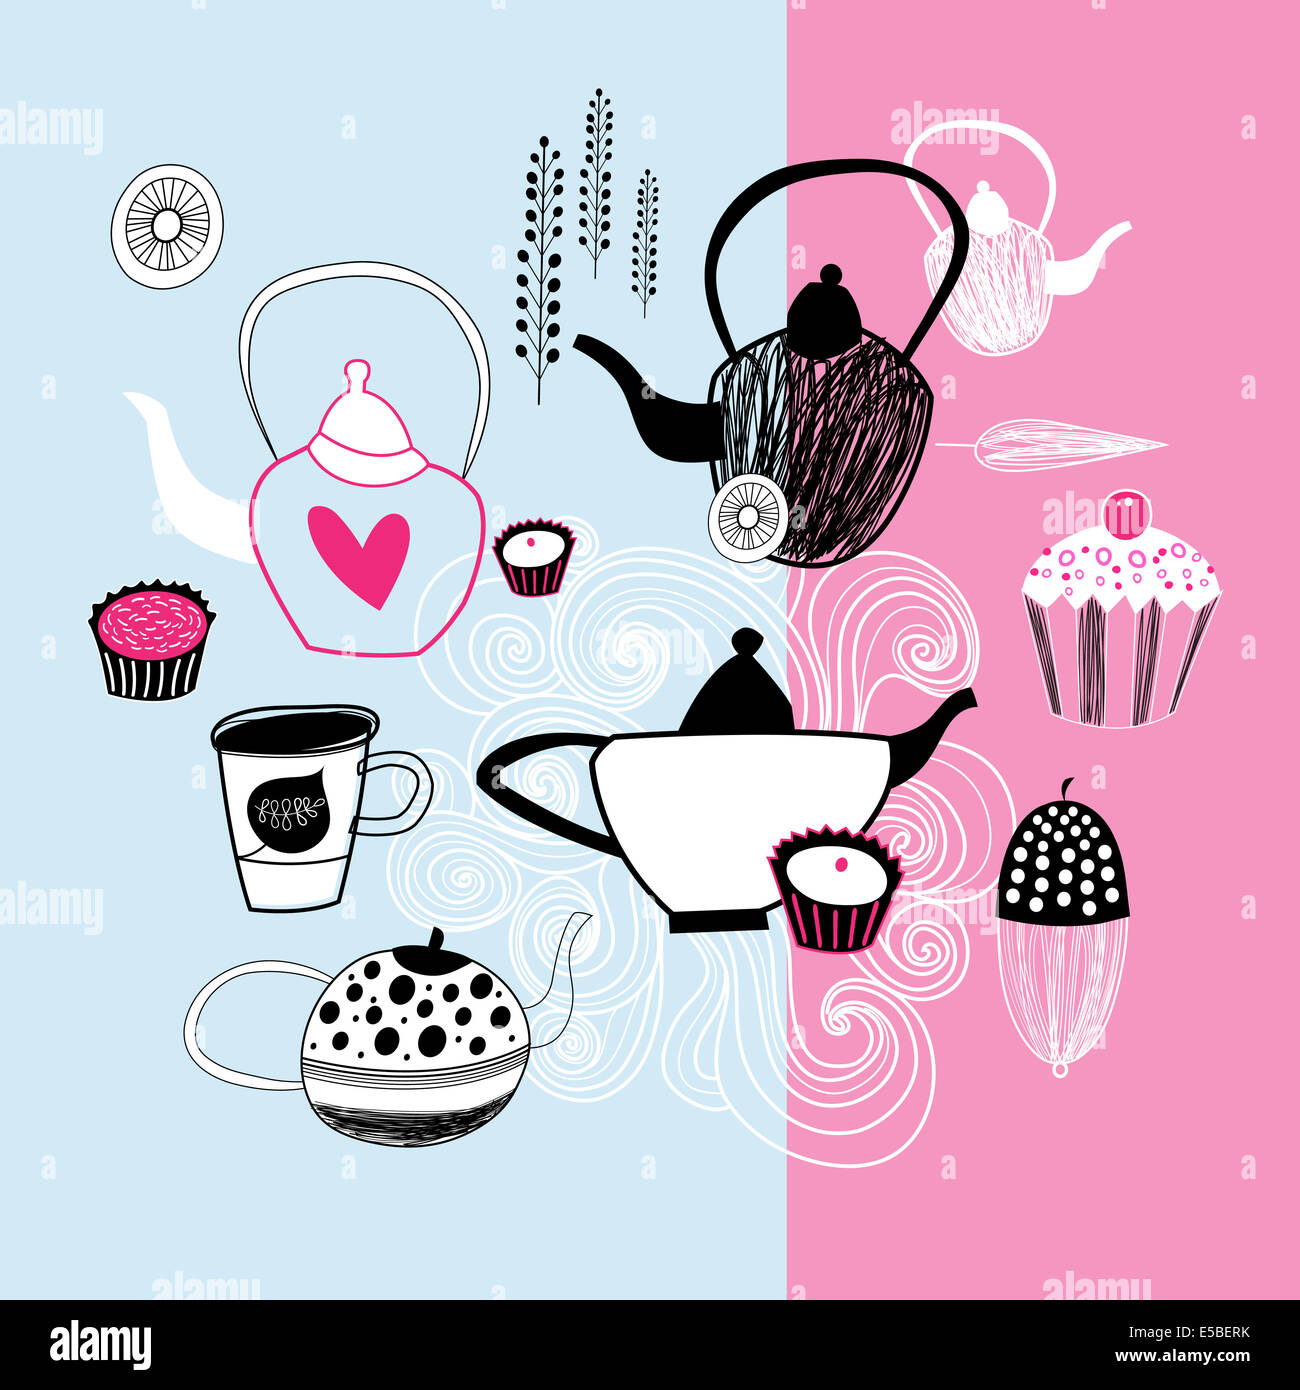 beautiful graphic images teapots and cakes Stock Photo